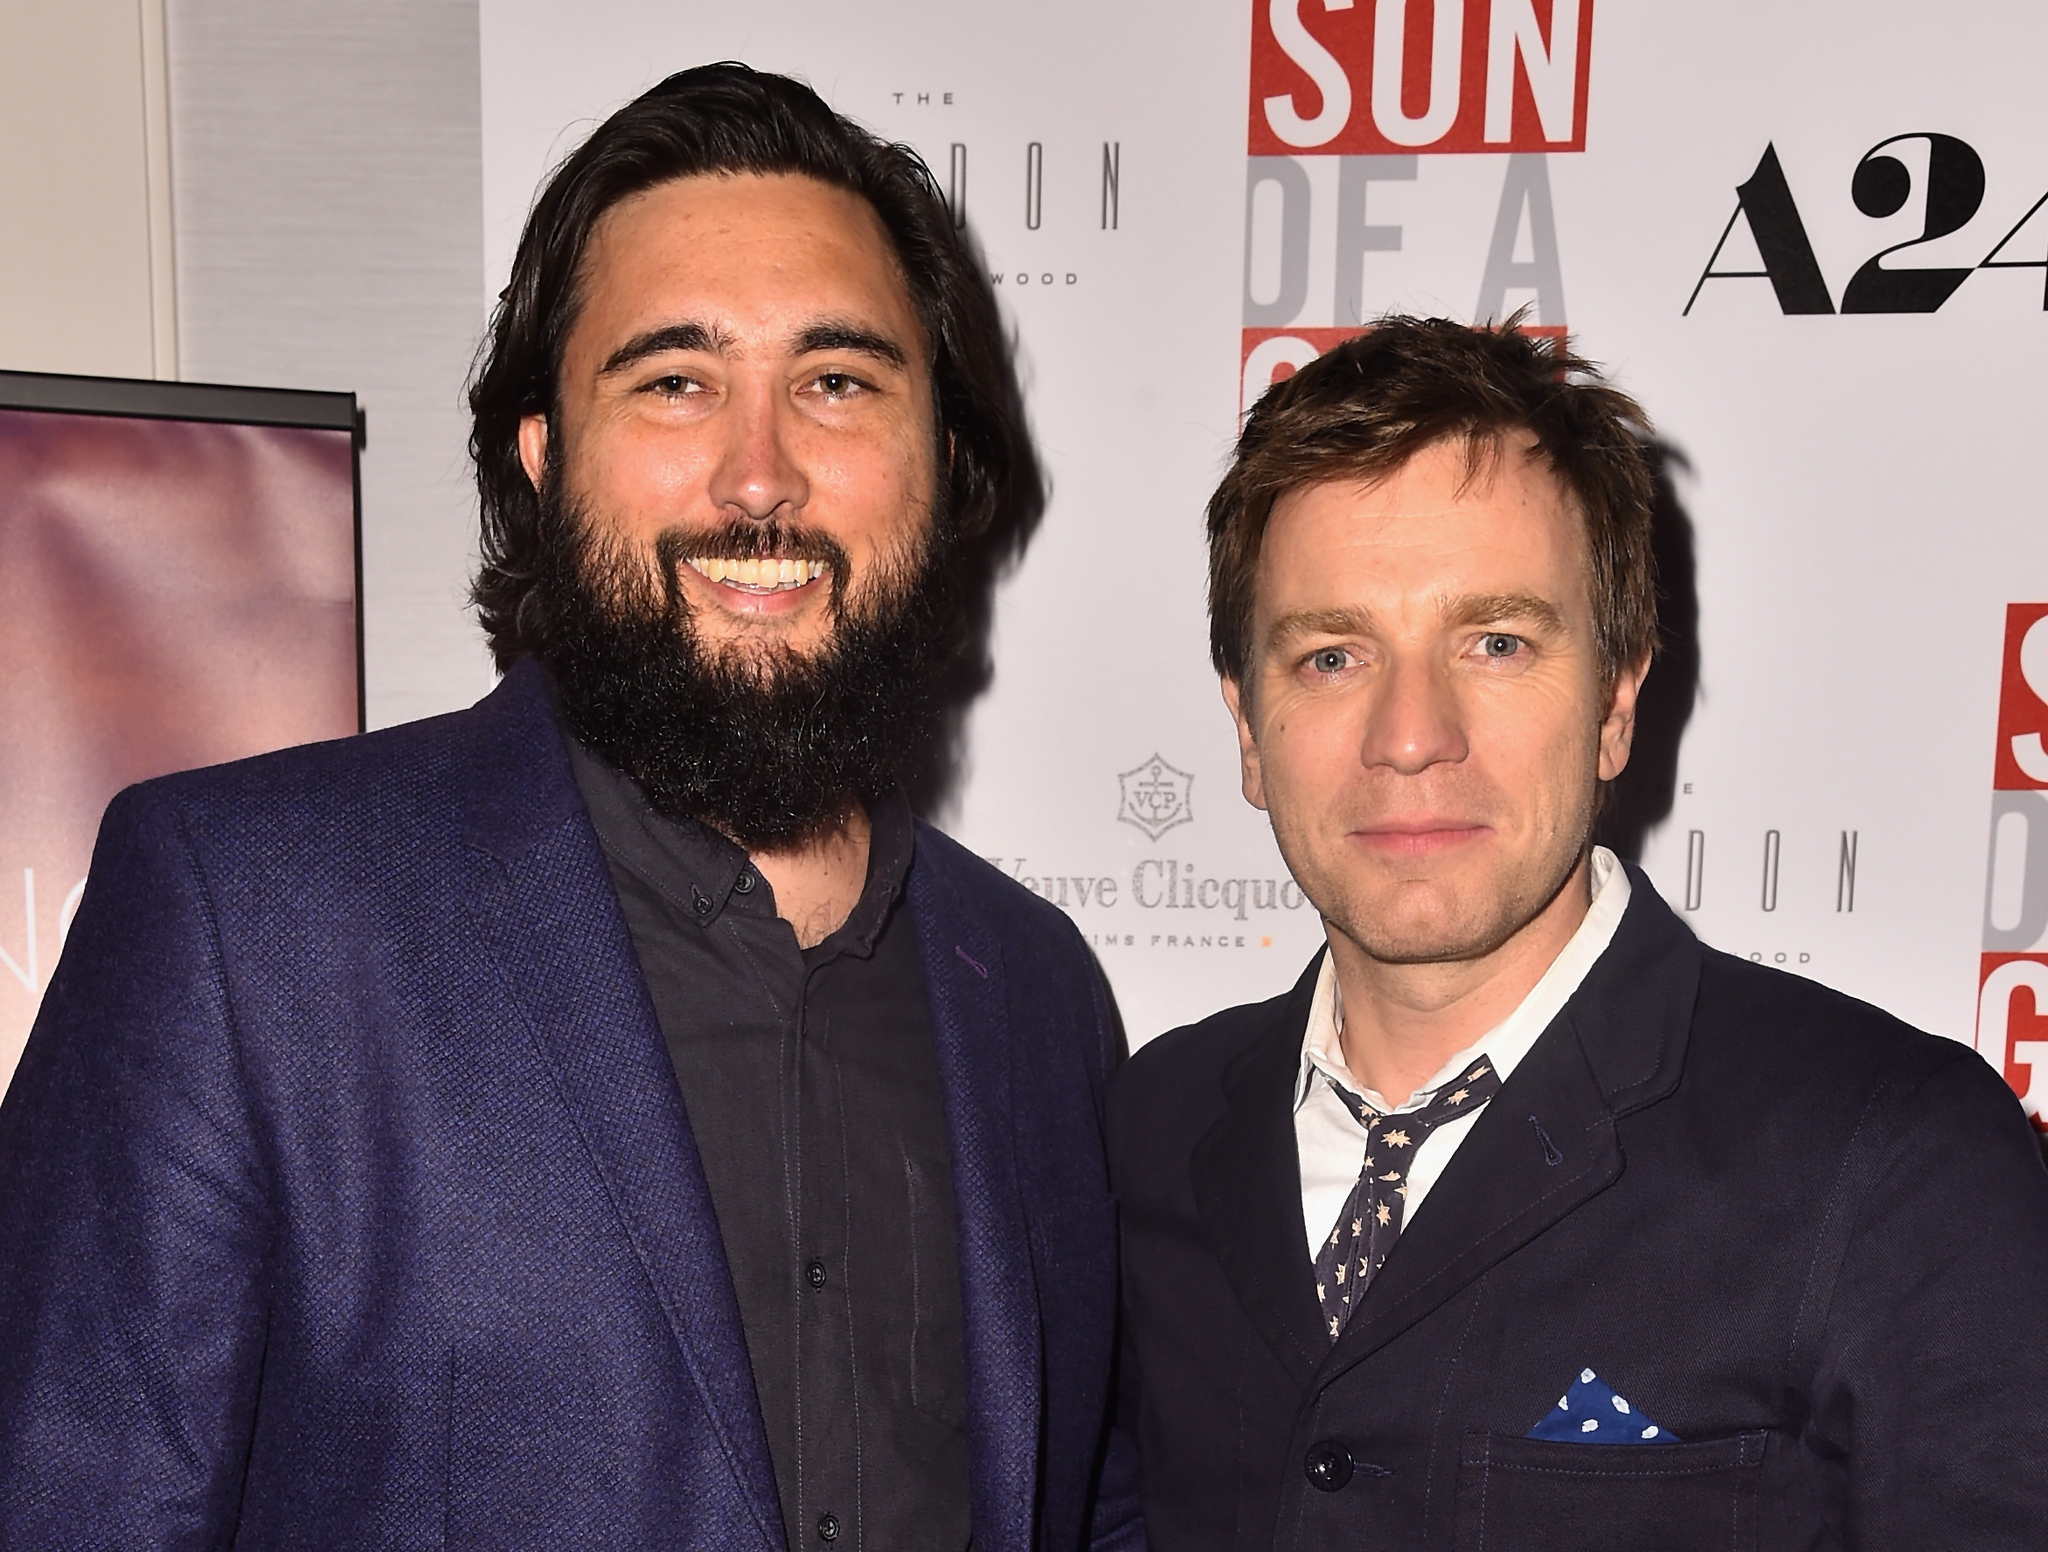 Ewan McGregor and Julius Avery at event of Son of a Gun (2014)